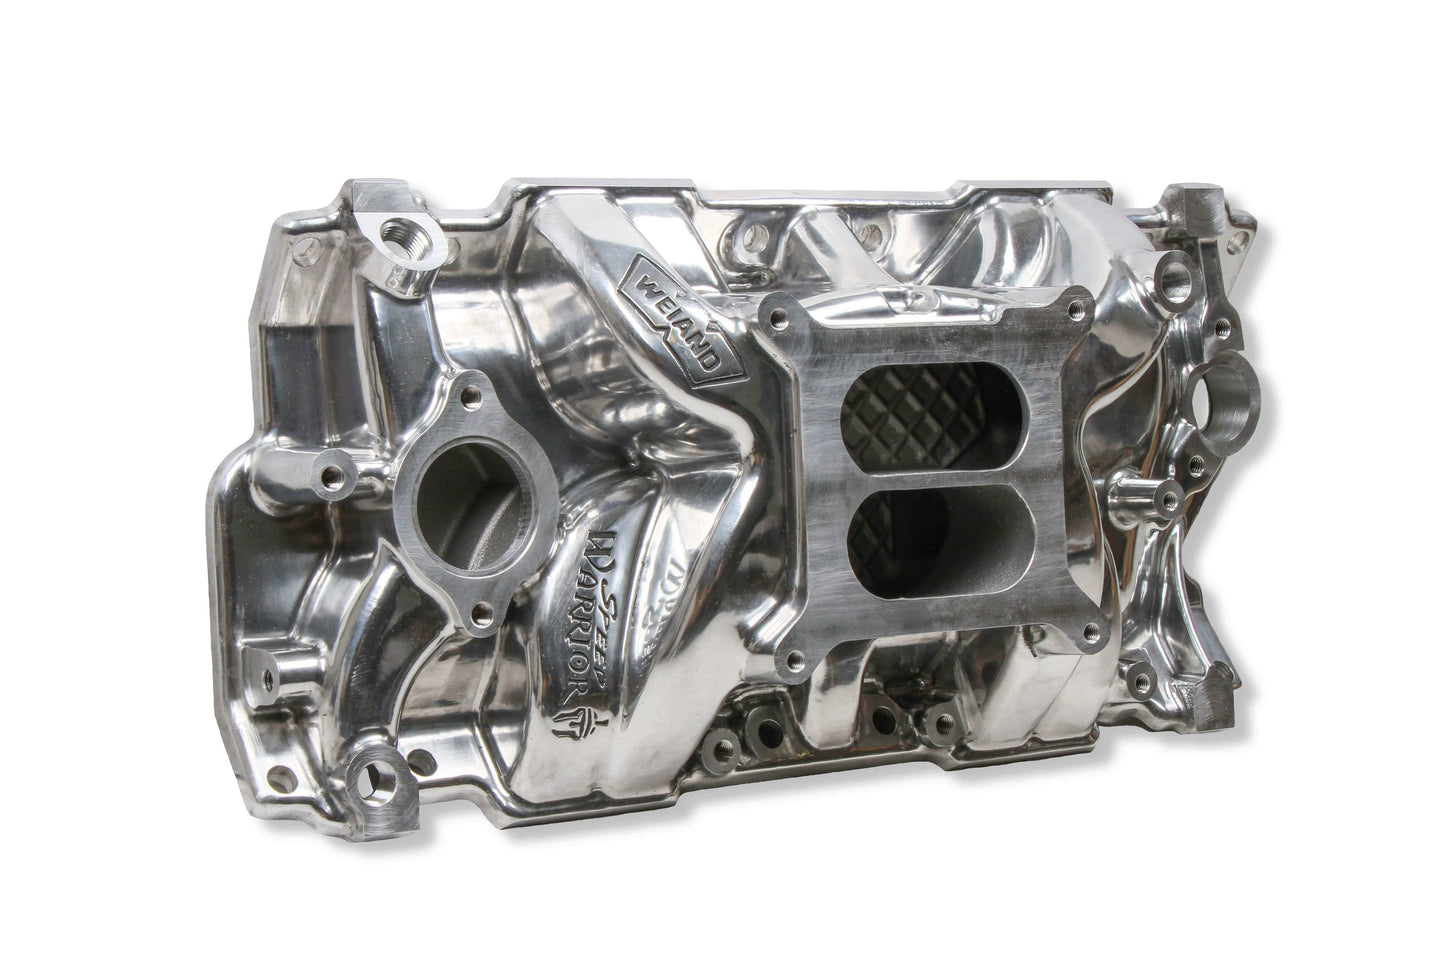 Weiand Speed Warrior Intake - Chevy Small Block V8 - 8170P